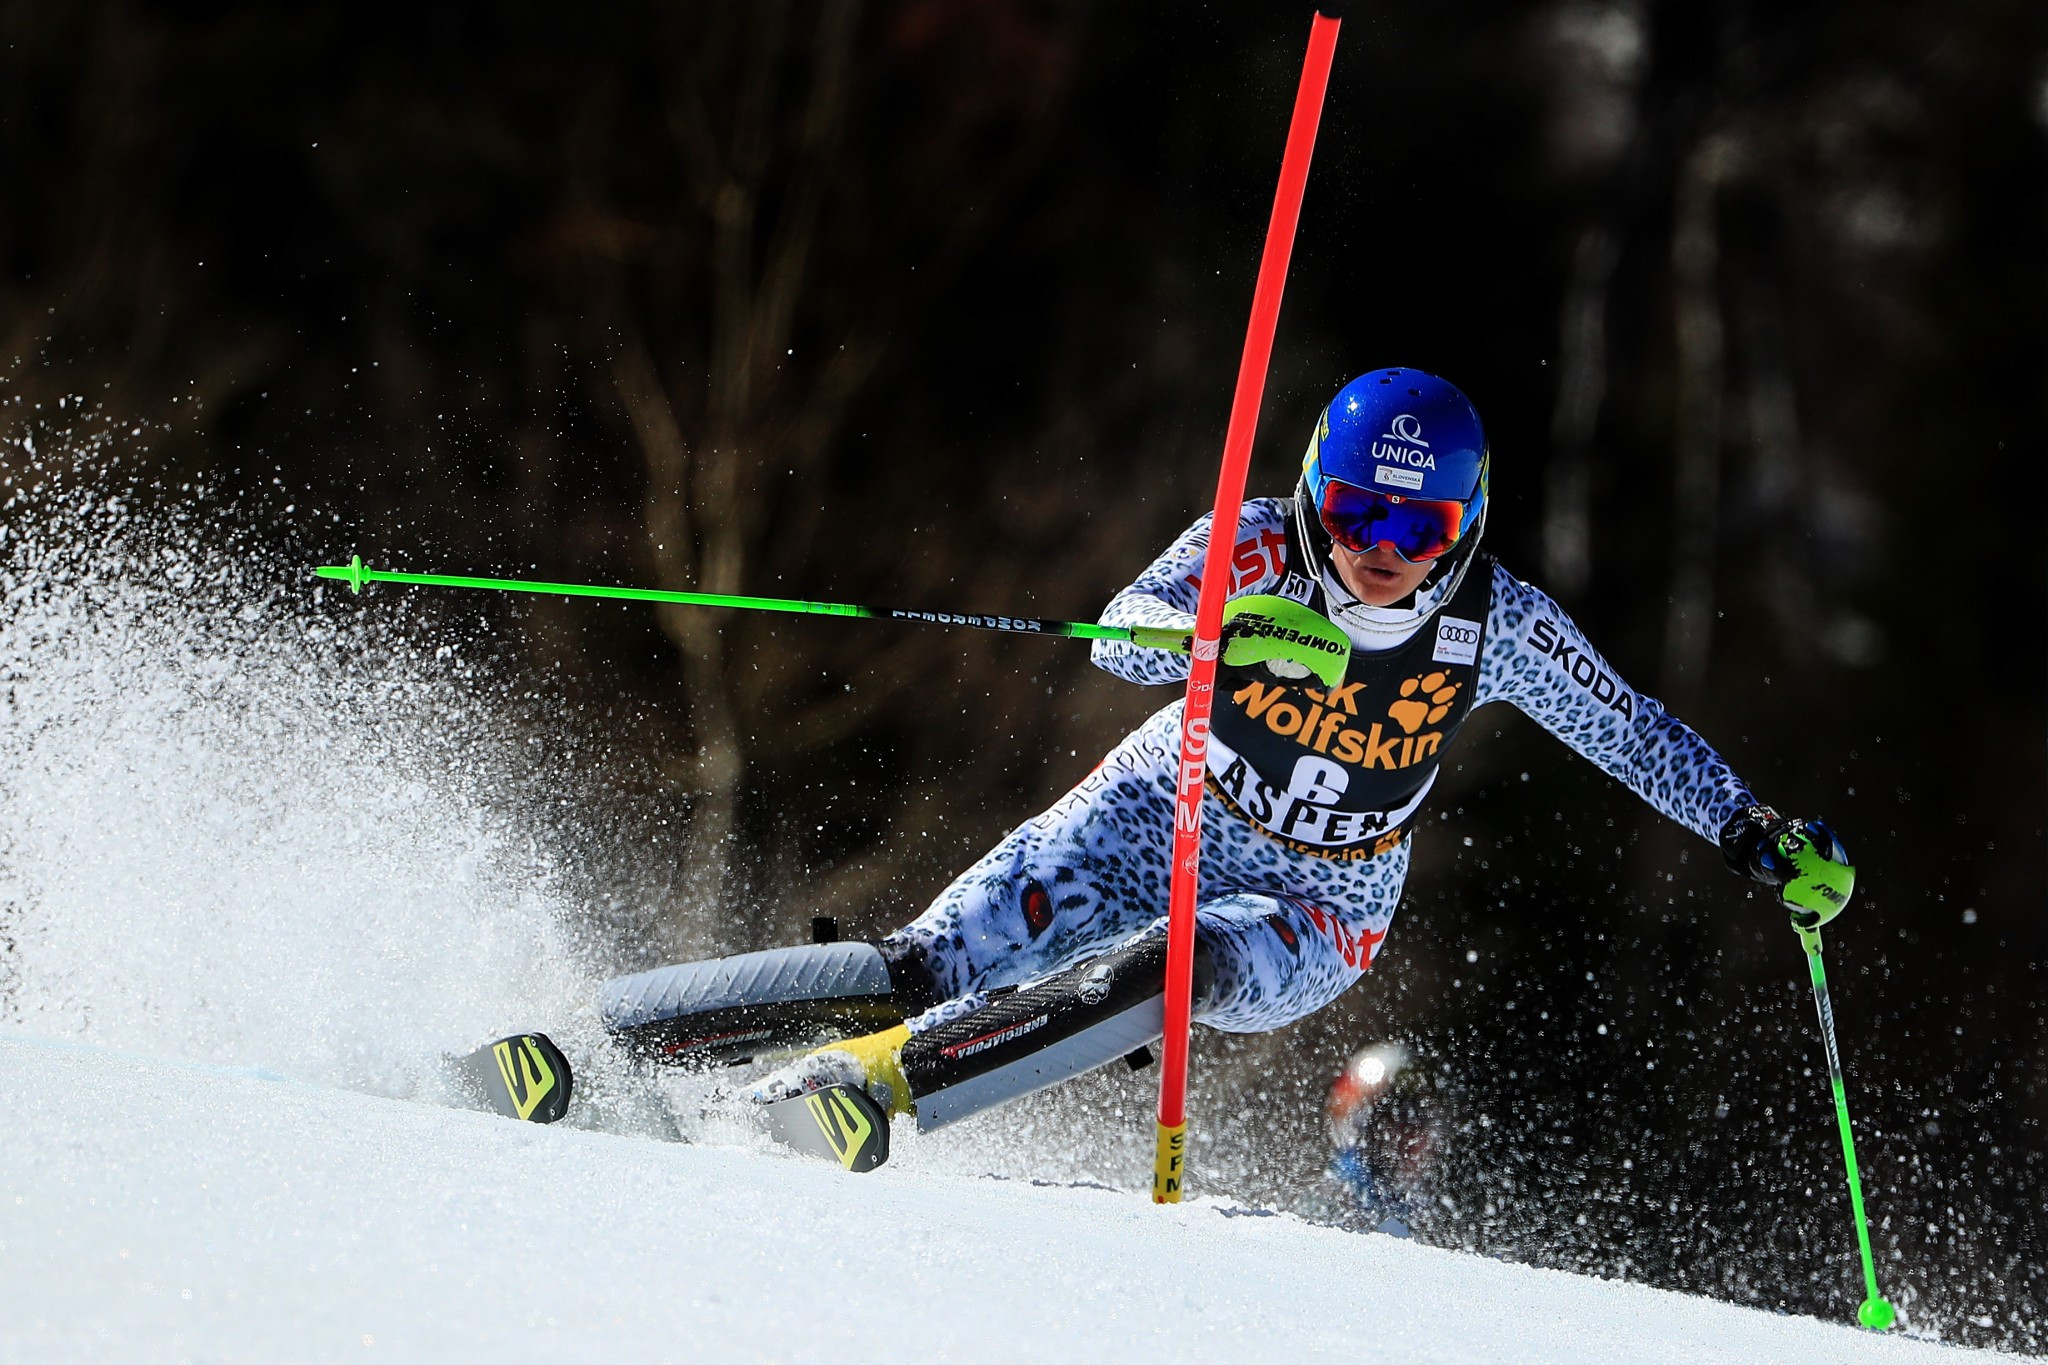 Veronika Velez-Zuzulova is an Olympic medal hope in the slalom ©Getty Images